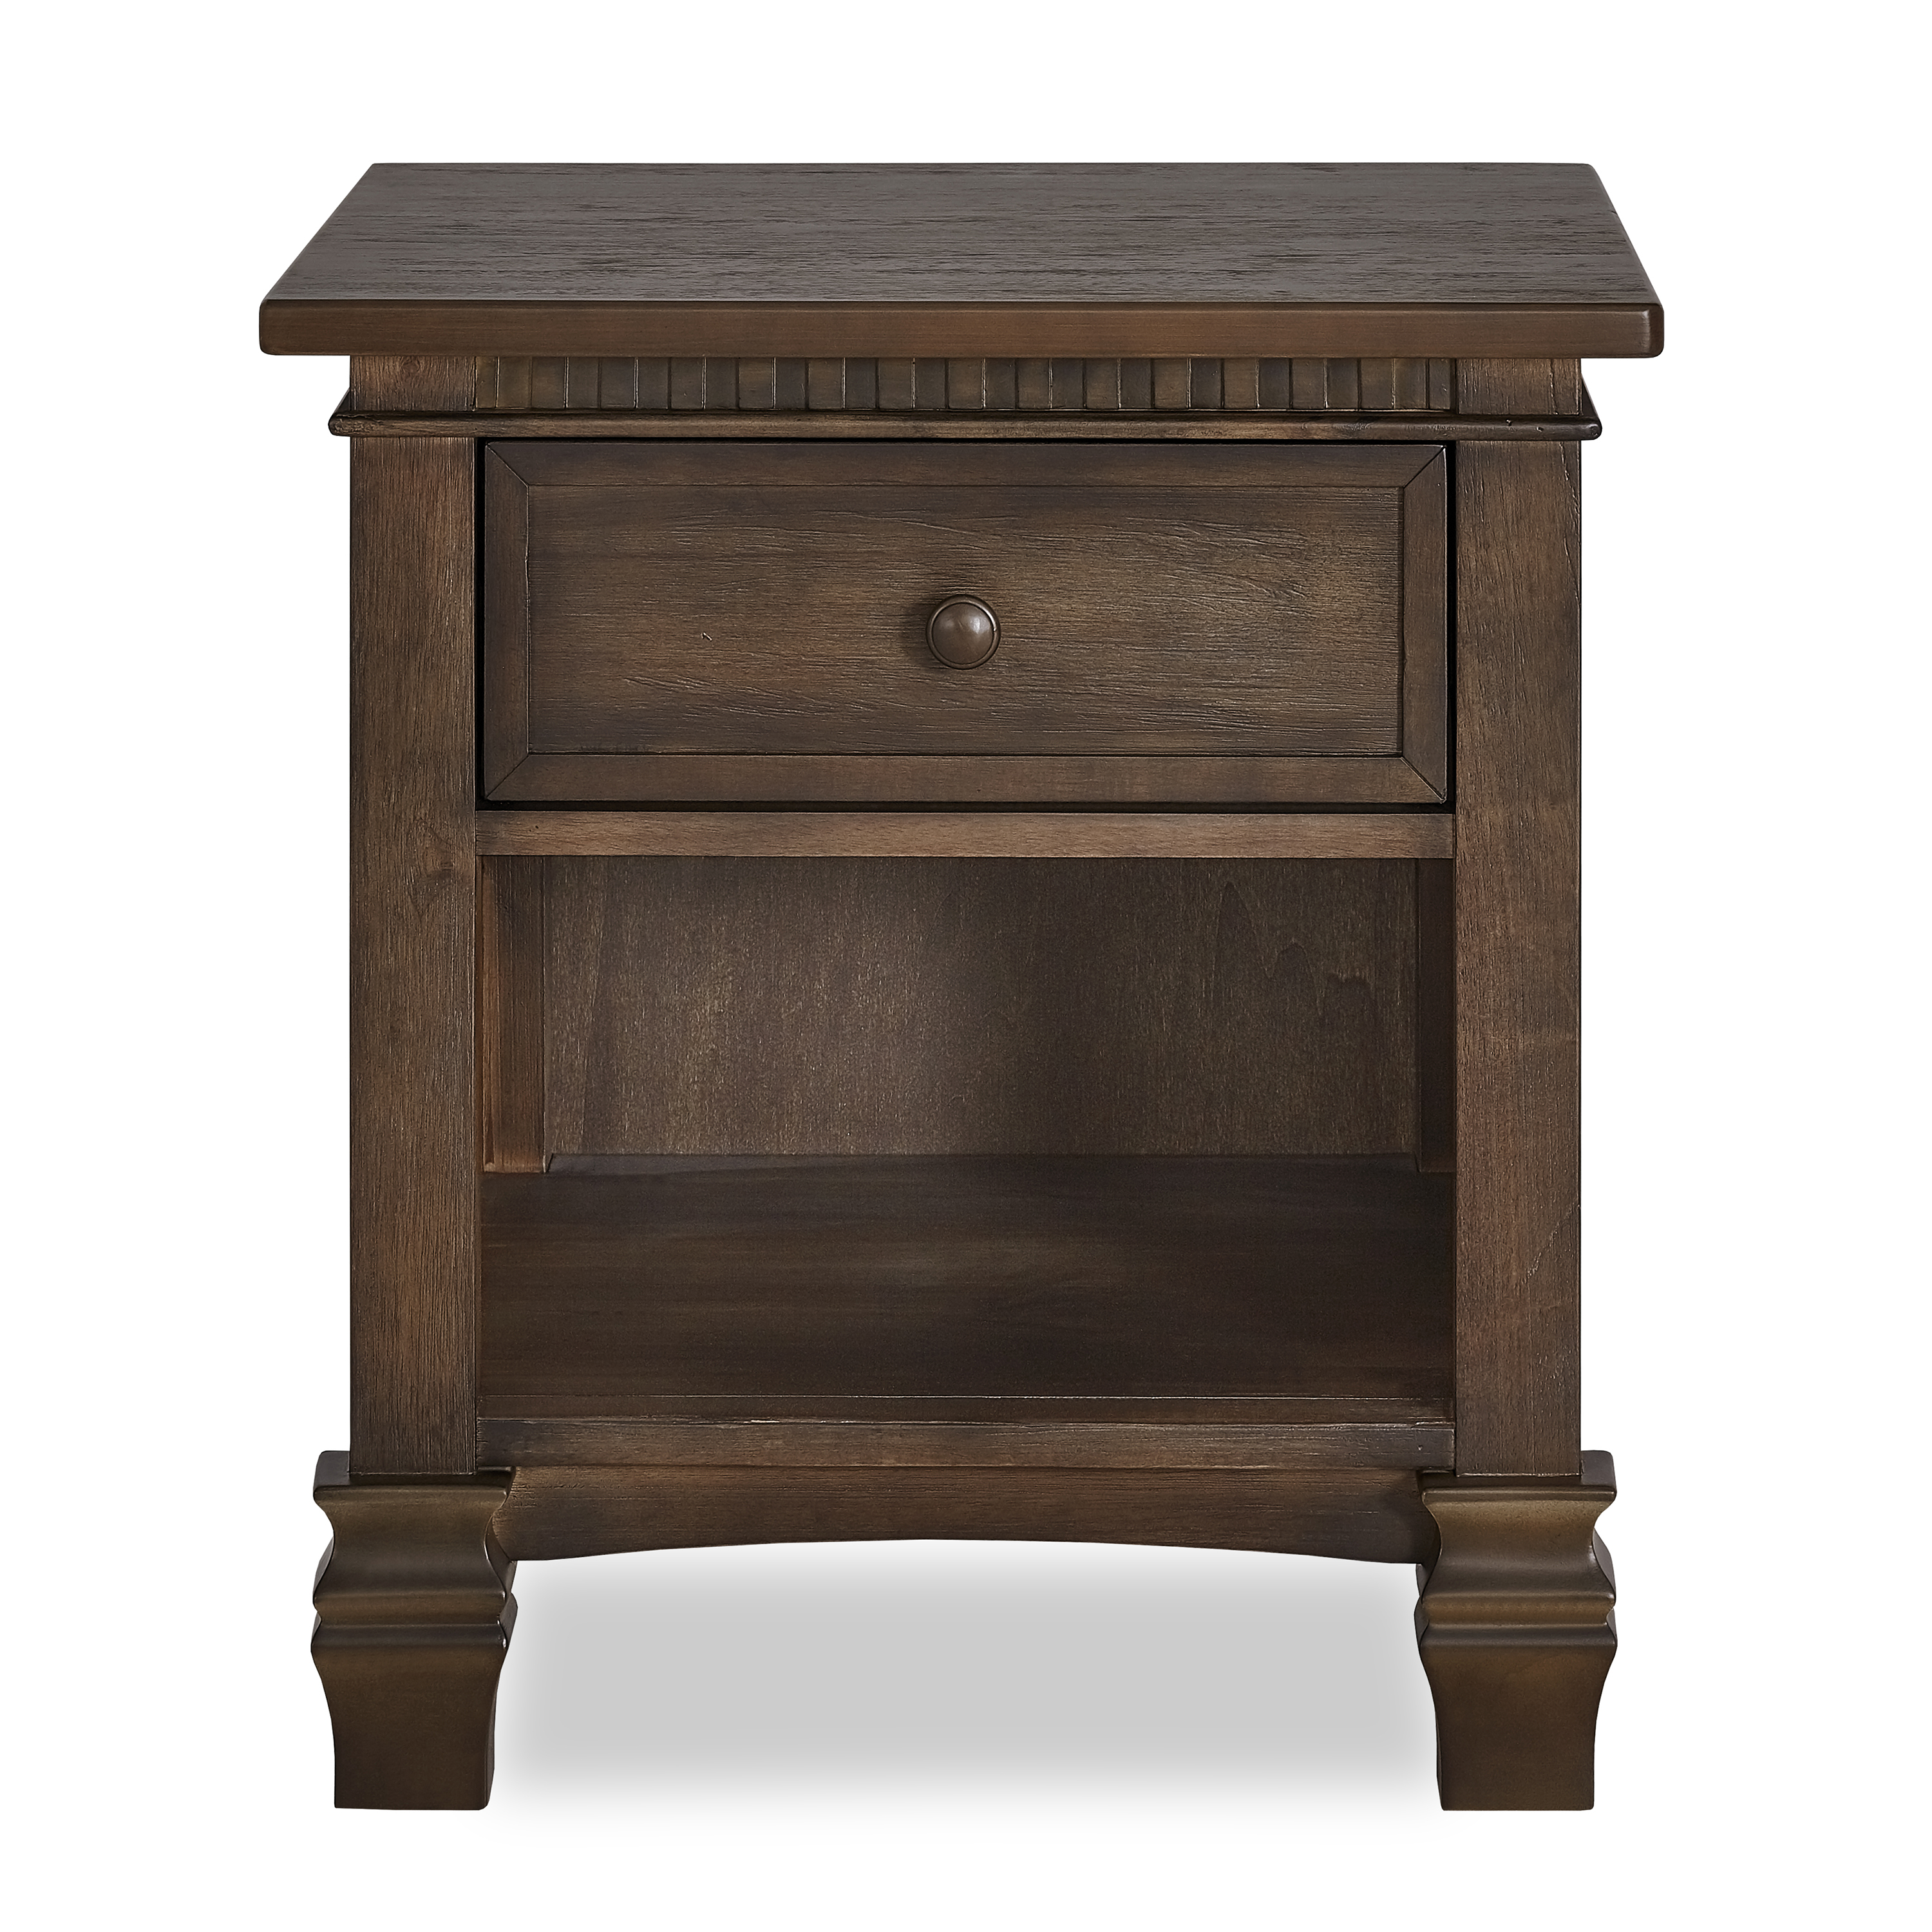 Evolur Cheyenne and Santa Fe Night Stand, Antique Brown - image 2 of 2